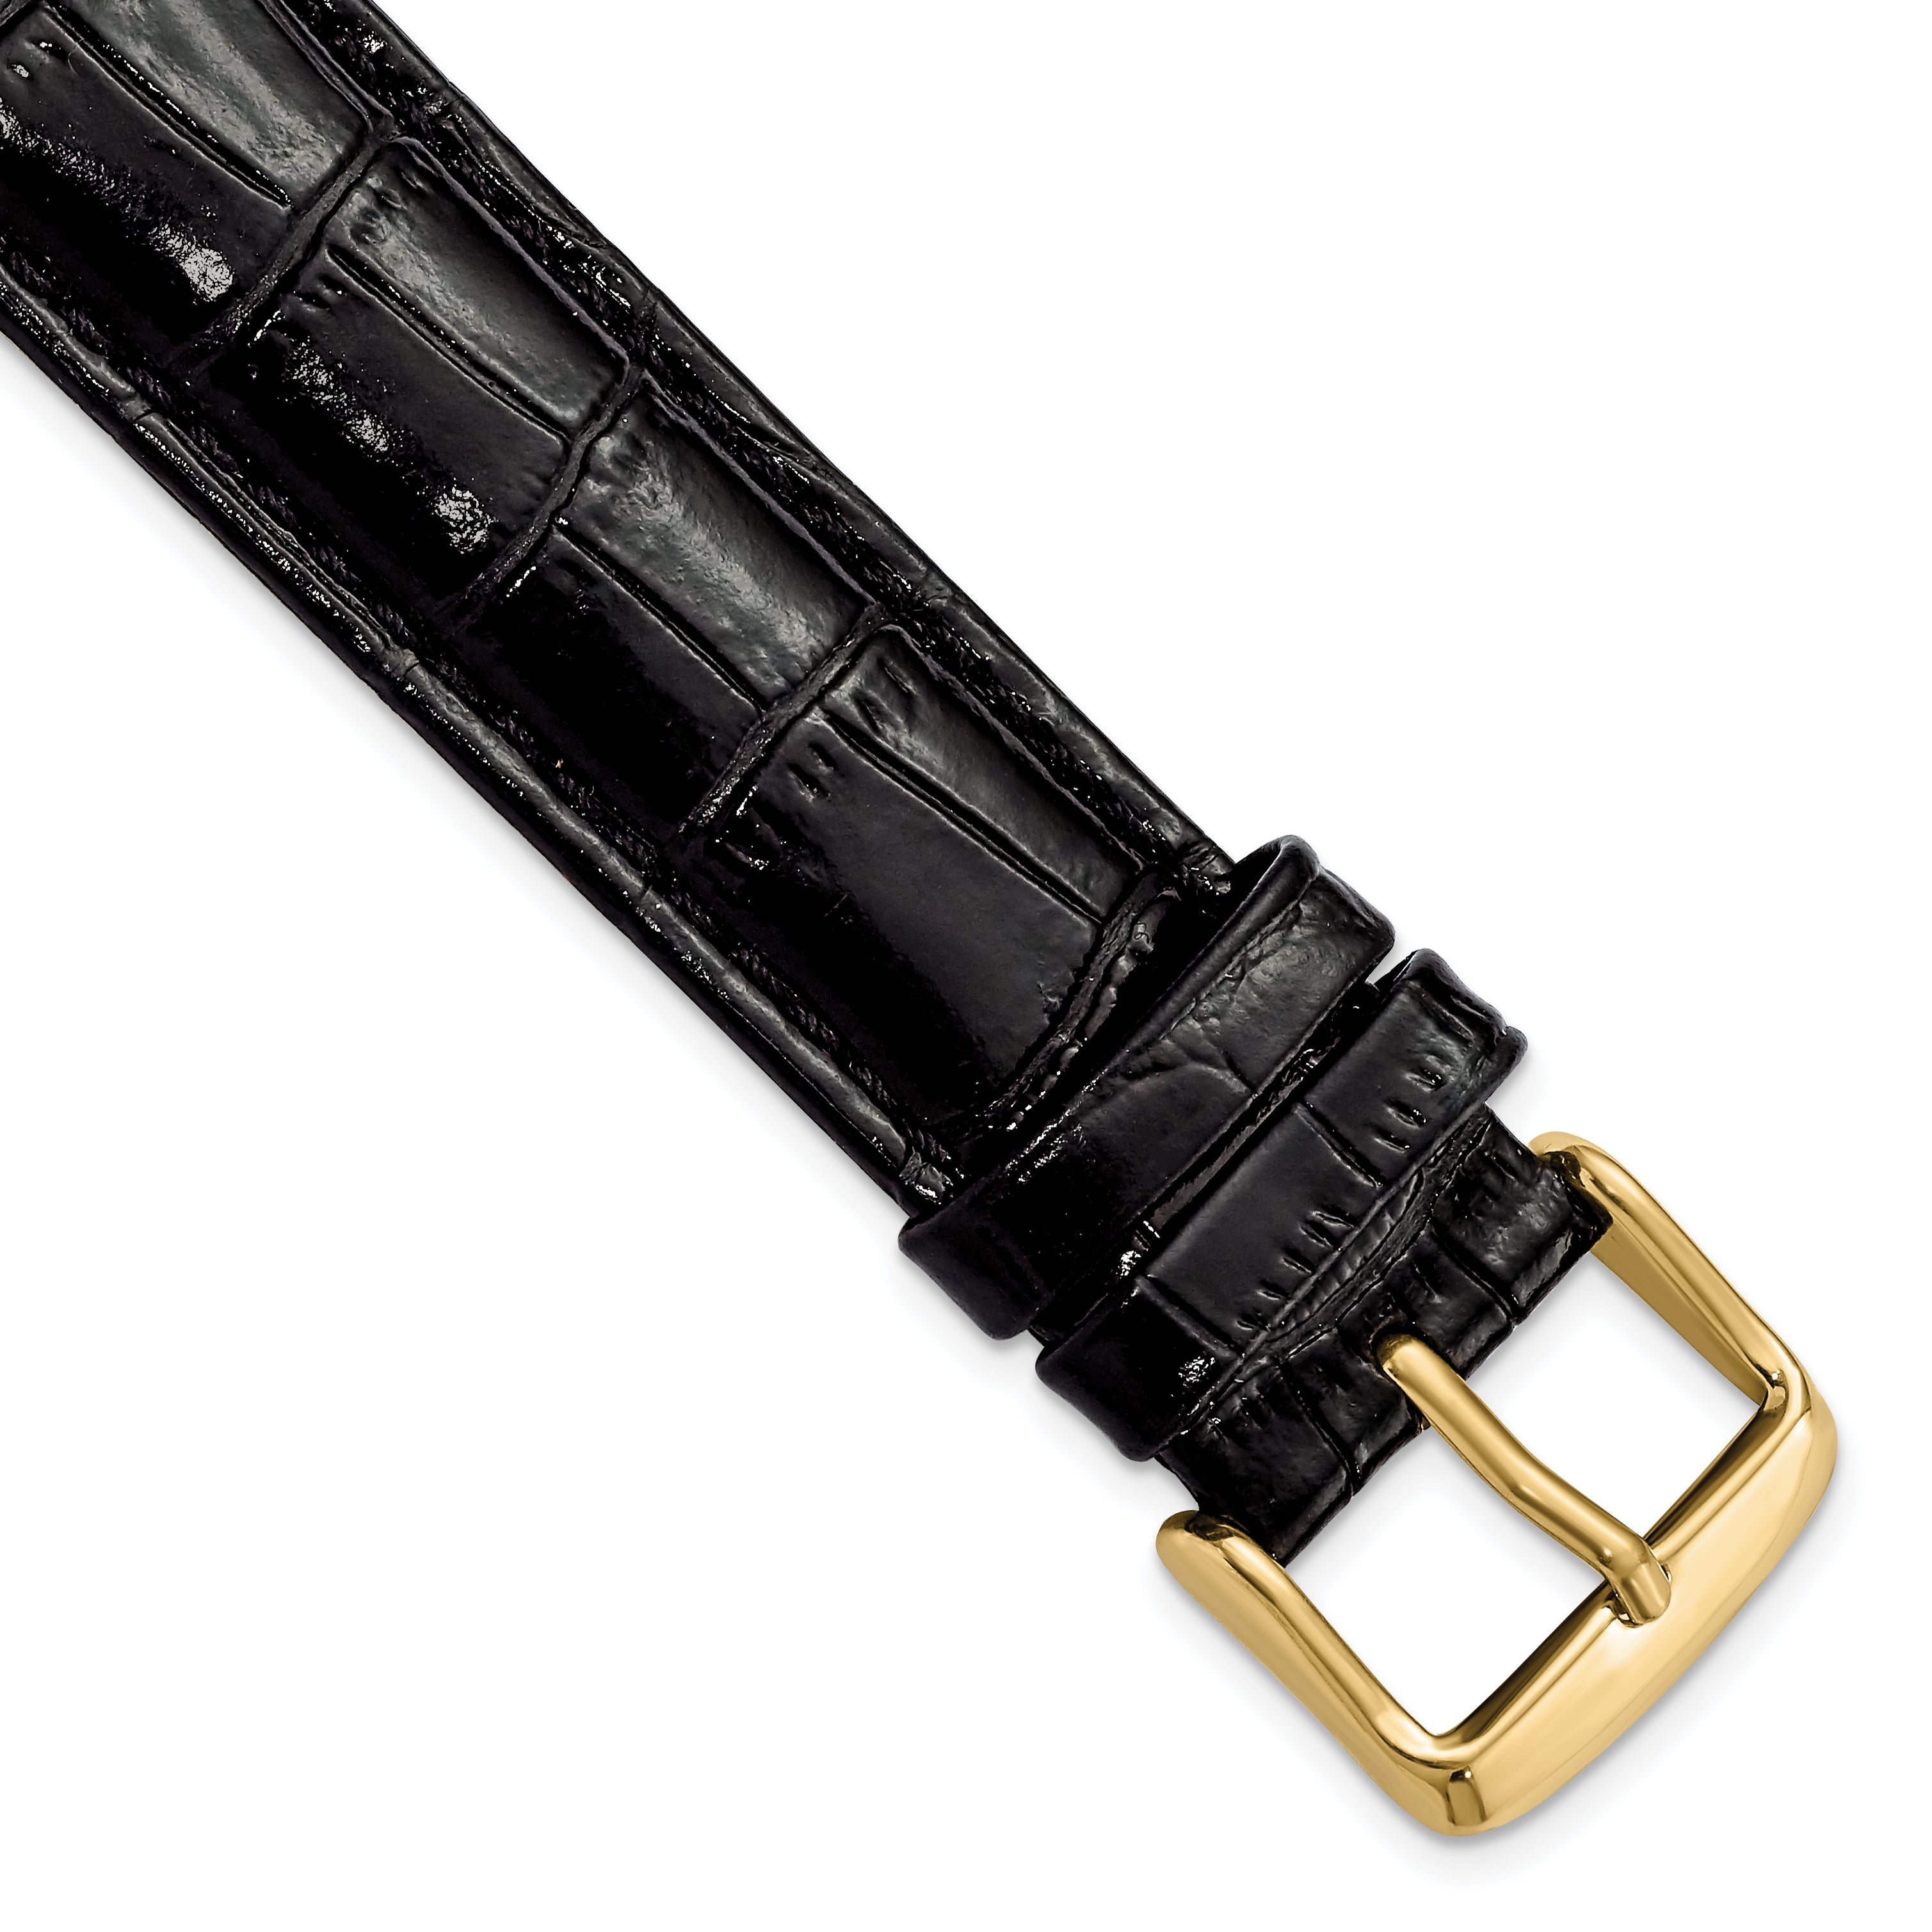 DeBeer 19mm Black Crocodile Grain Chronograph Leather with Gold-tone Buckle 7.5 inch Watch Band